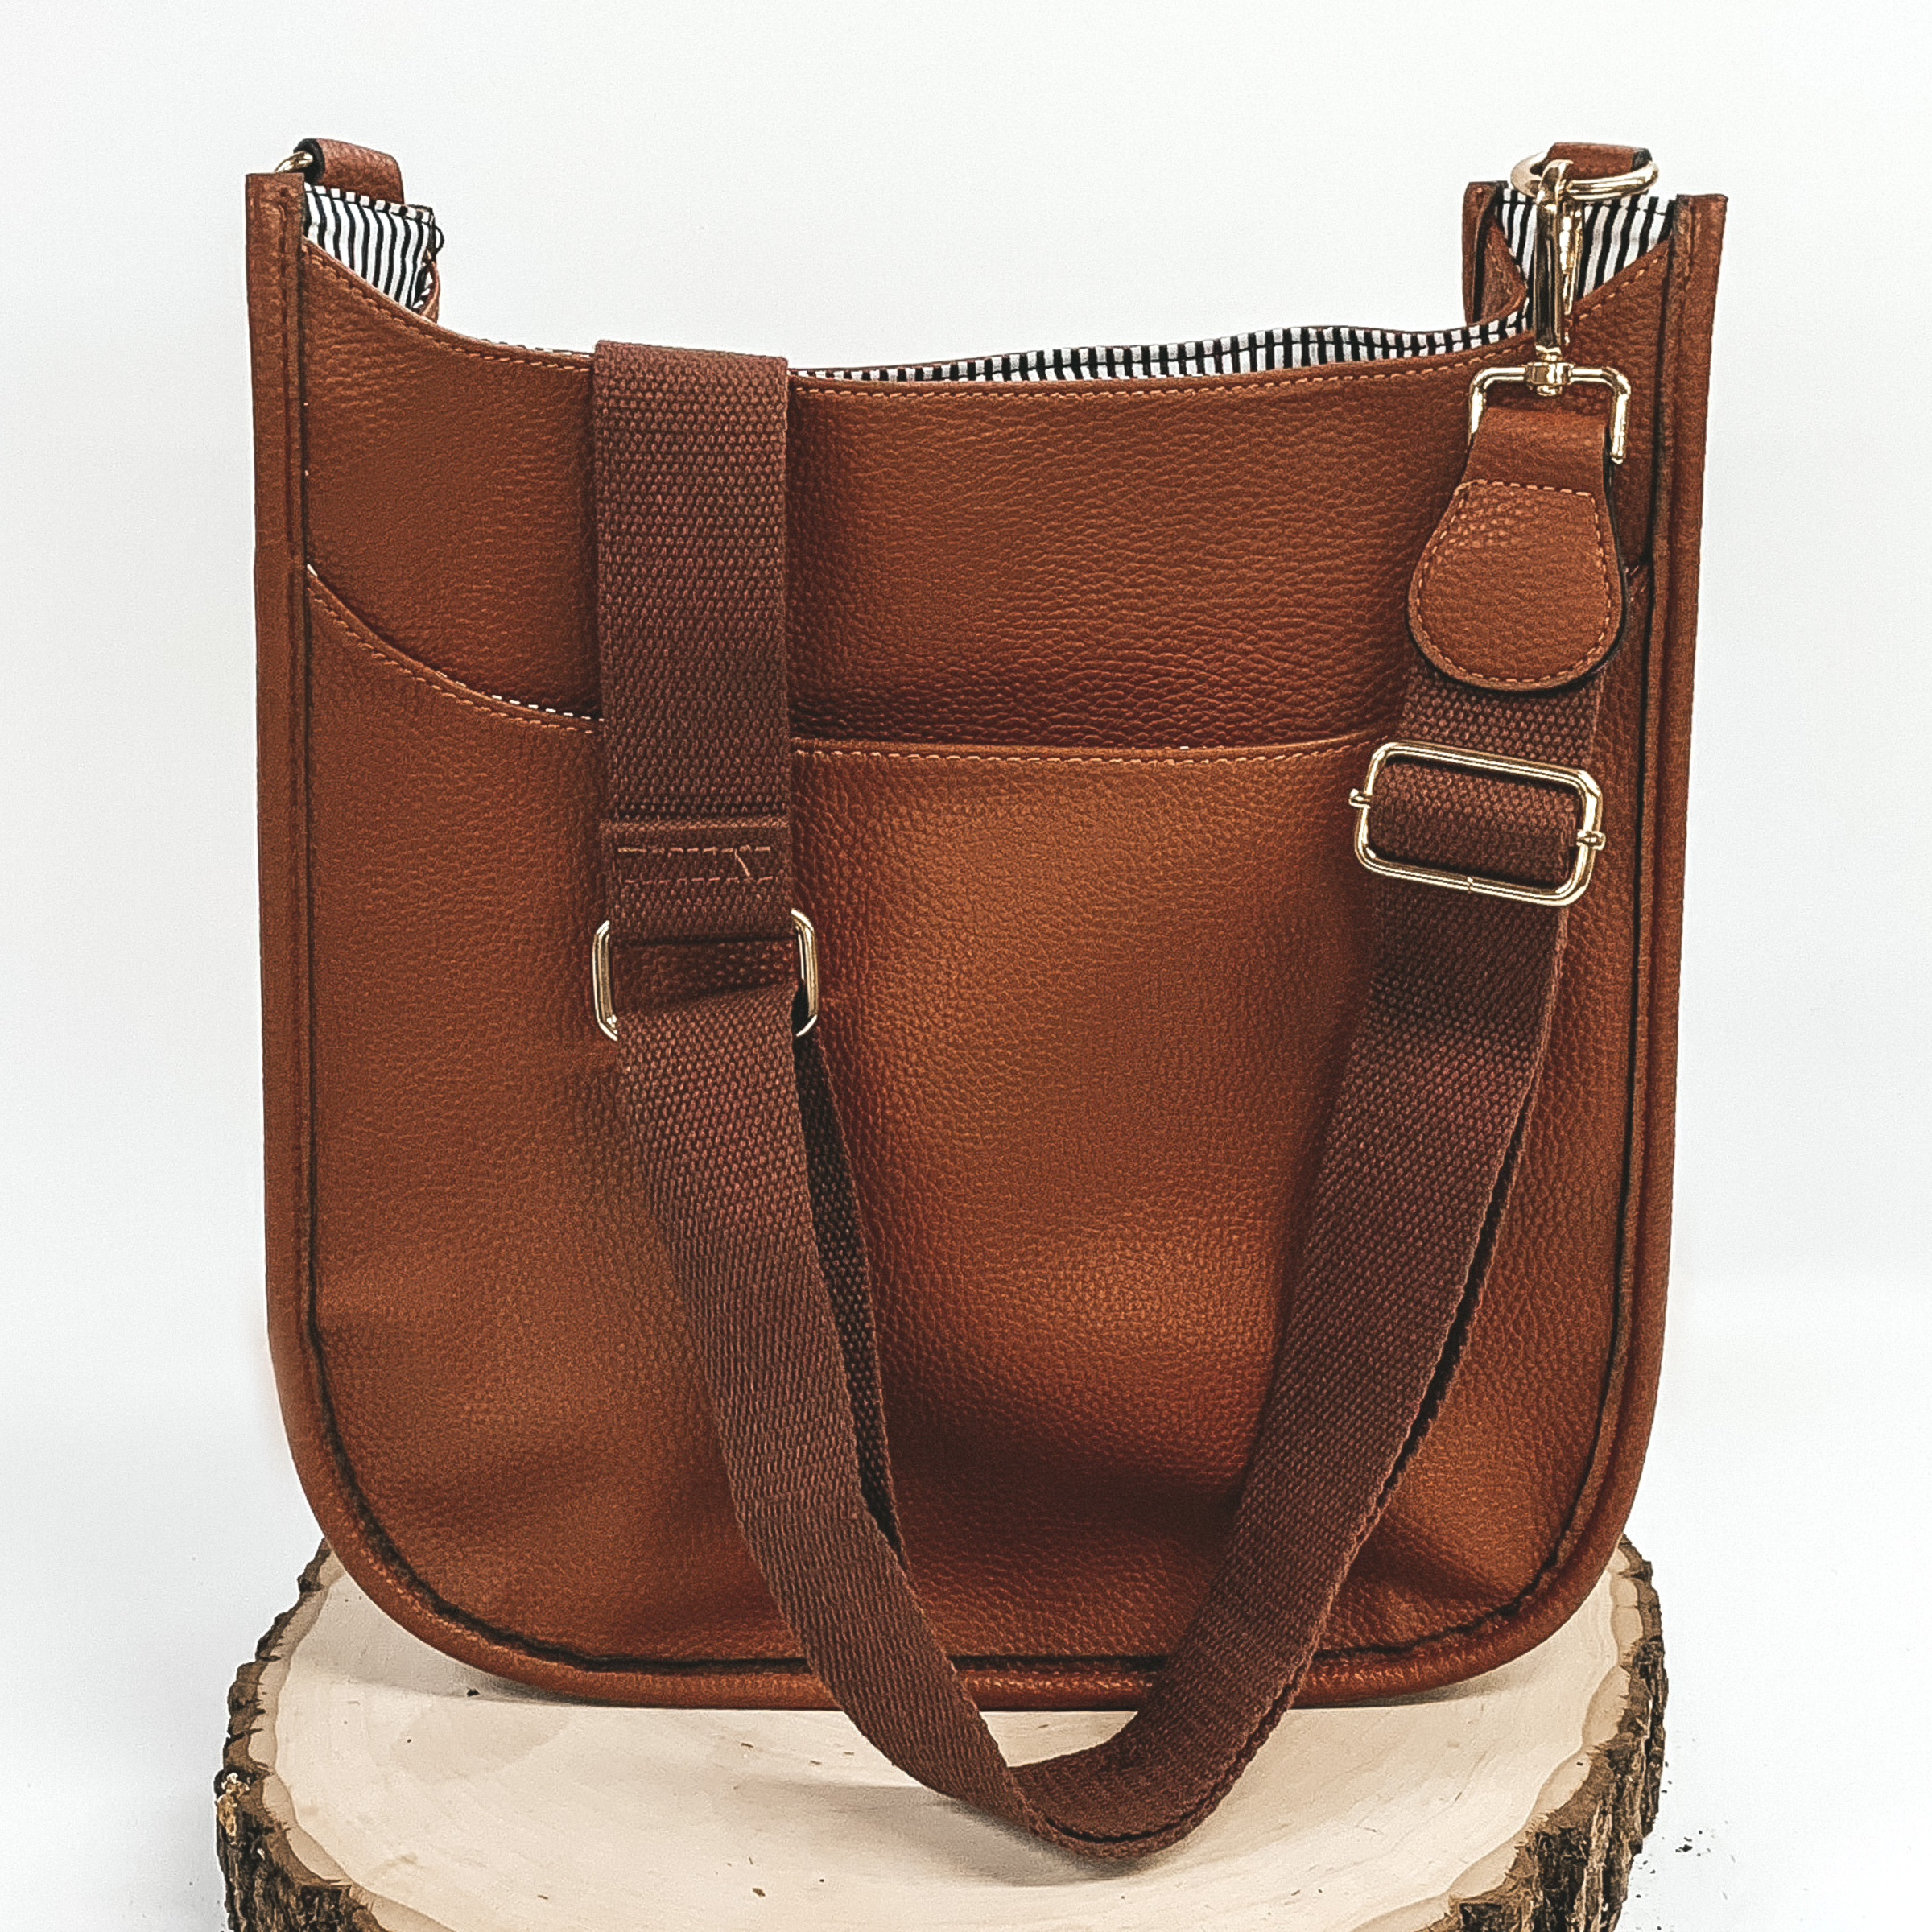 Crossbody Travel Purse in Brown - Giddy Up Glamour Boutique